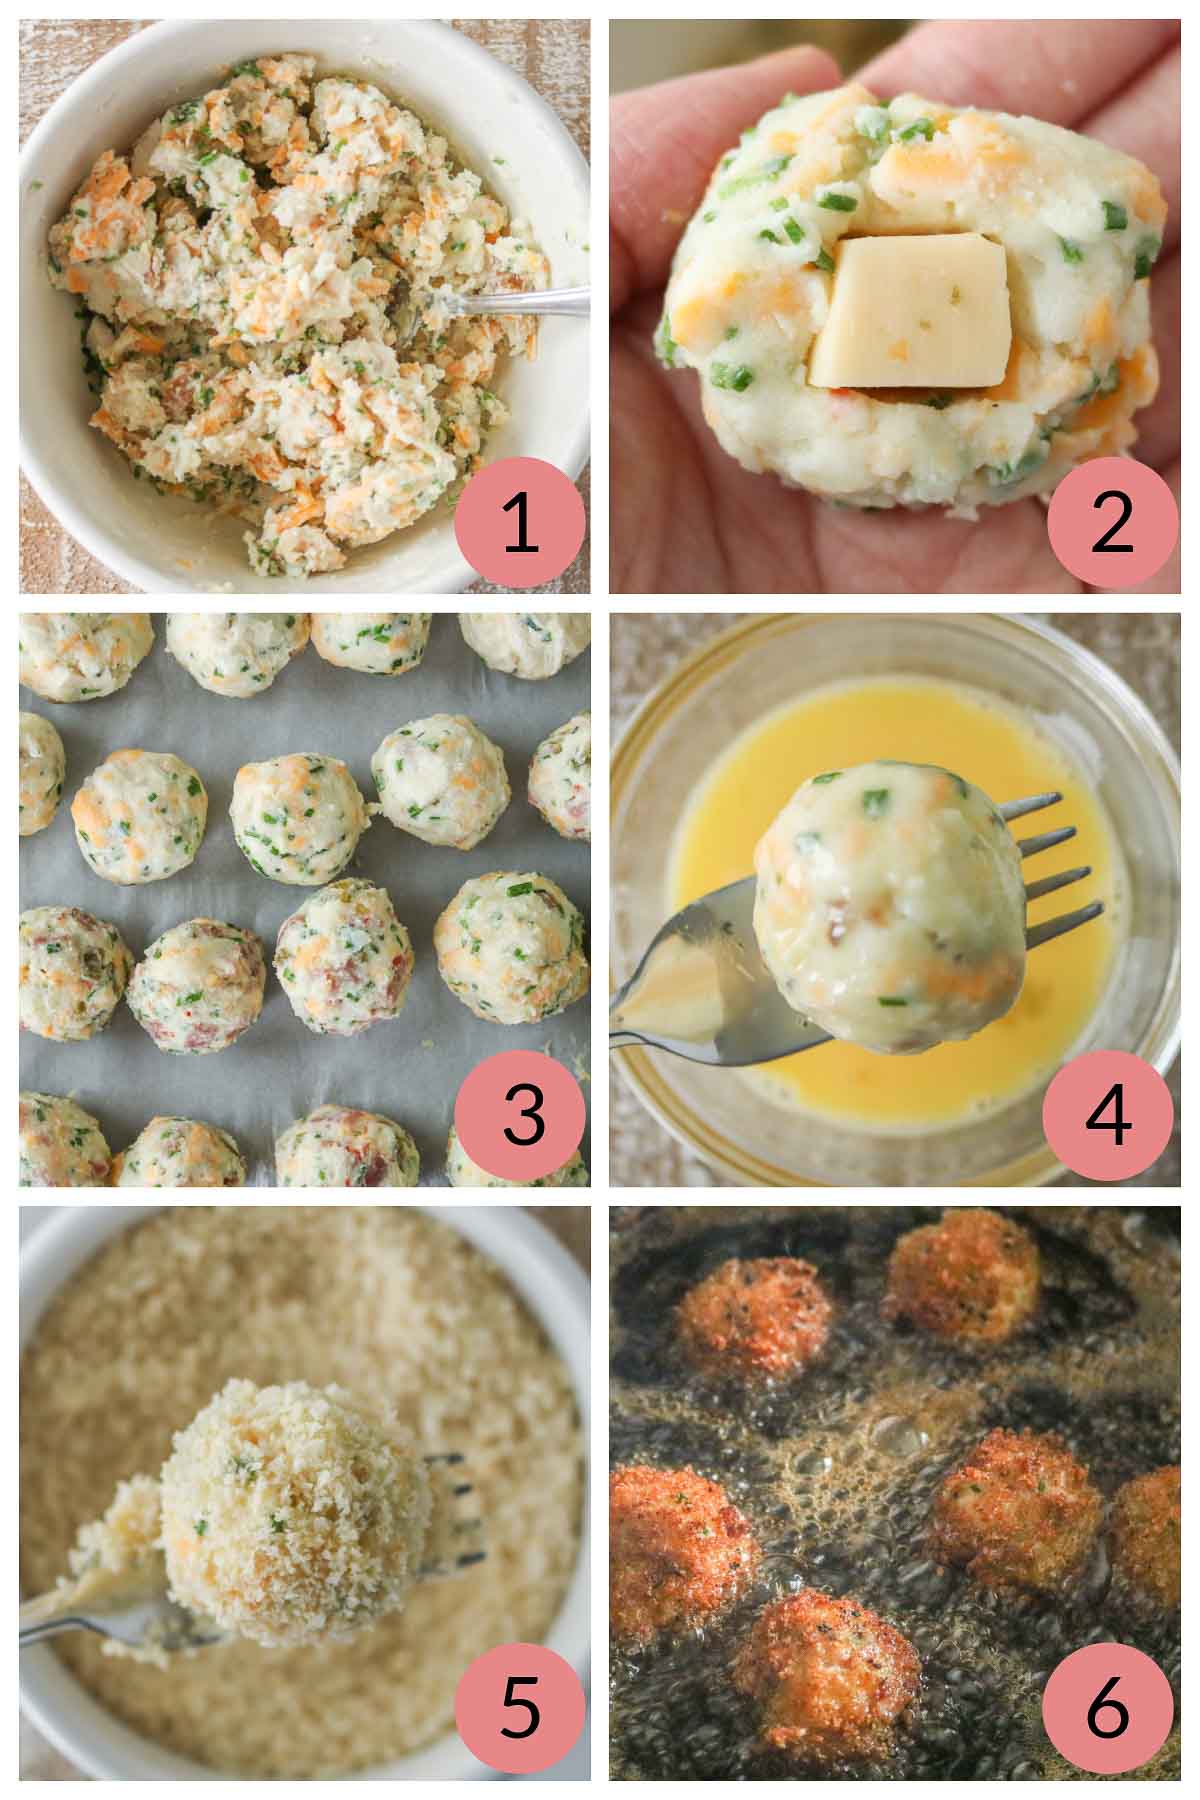 Collage of steps to make cheese-stuffed fried mashed potato balls.